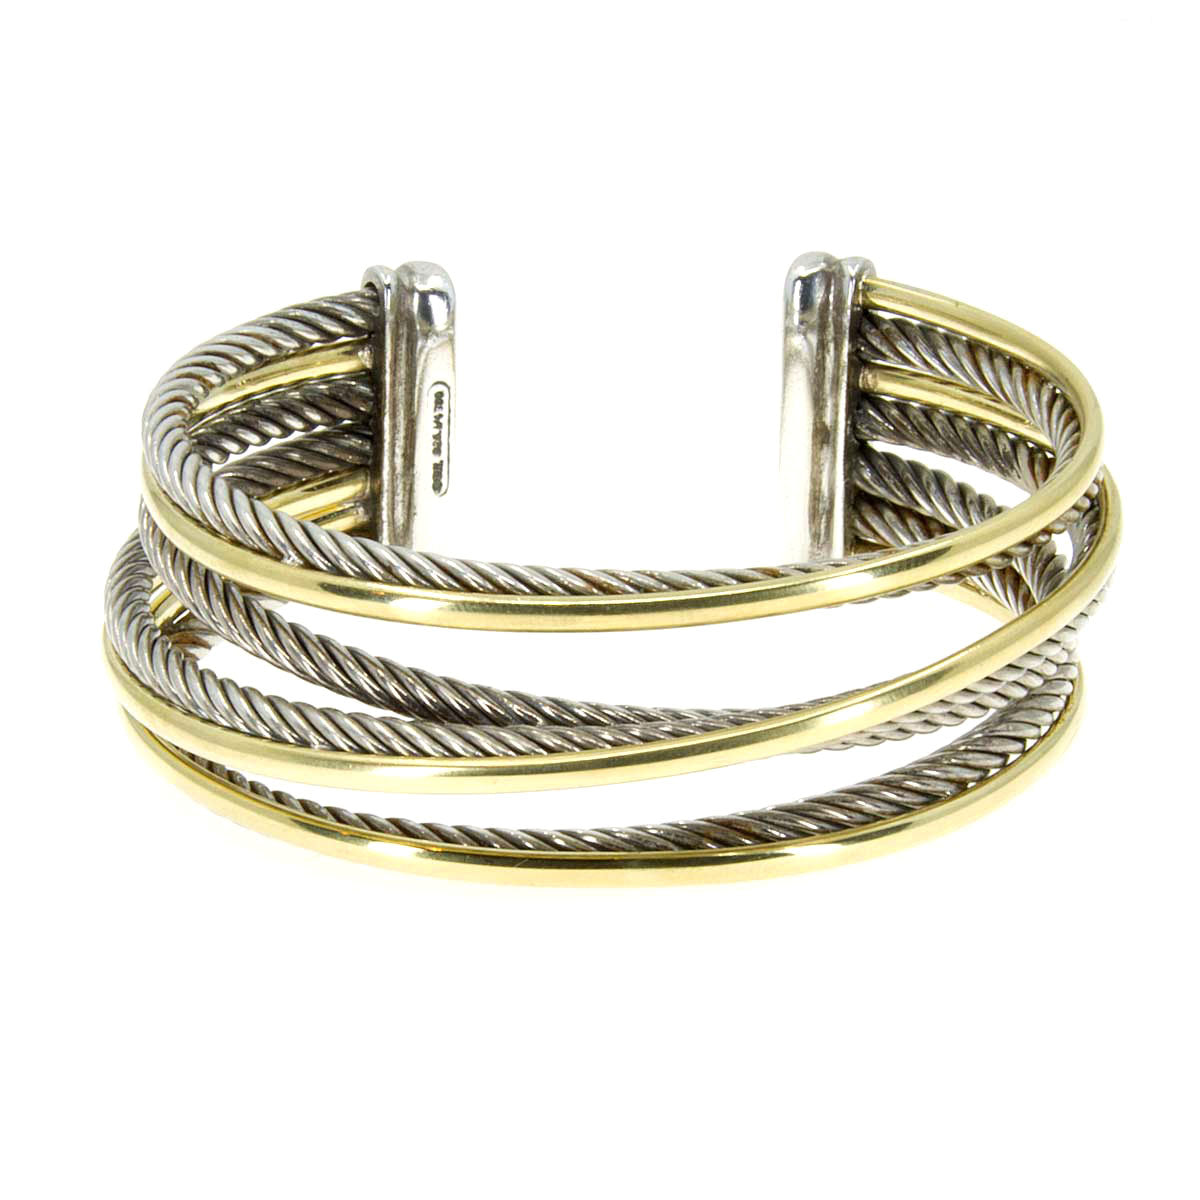 David Yurman Crossover Two-Row Cuff Bracelet in Sterling Silver with 18K  Yellow Gold | Nordstrom | David yurman bracelet, David yurman jewelry,  Jewelry accessories